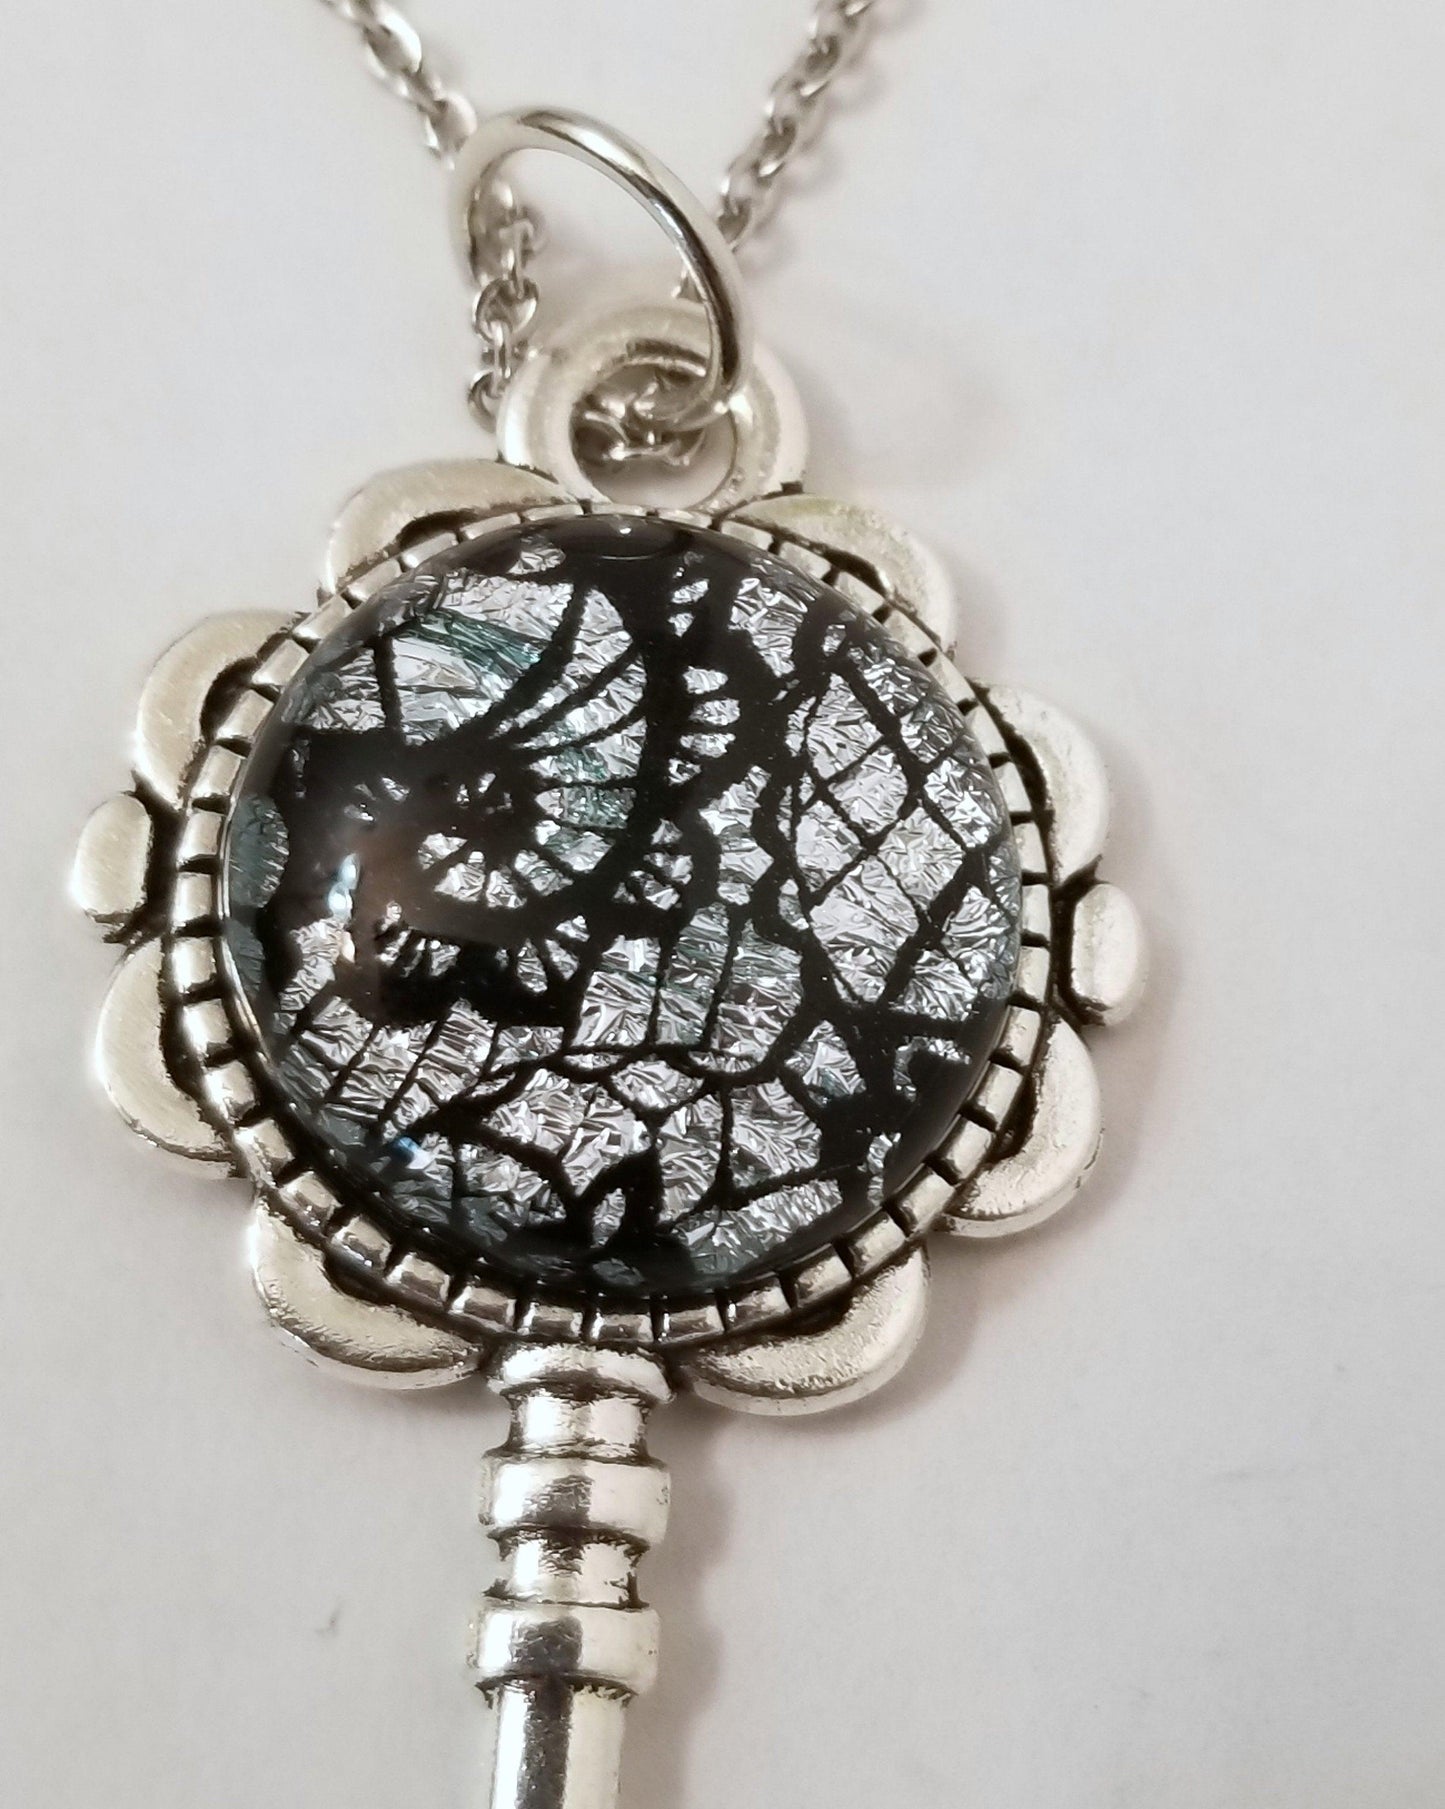 Silver finish Flowered Skeleton Key with Fused Glass Silver Lace Dichroic cabochon on 24 inch stainless steel chain Seeds Glassworks